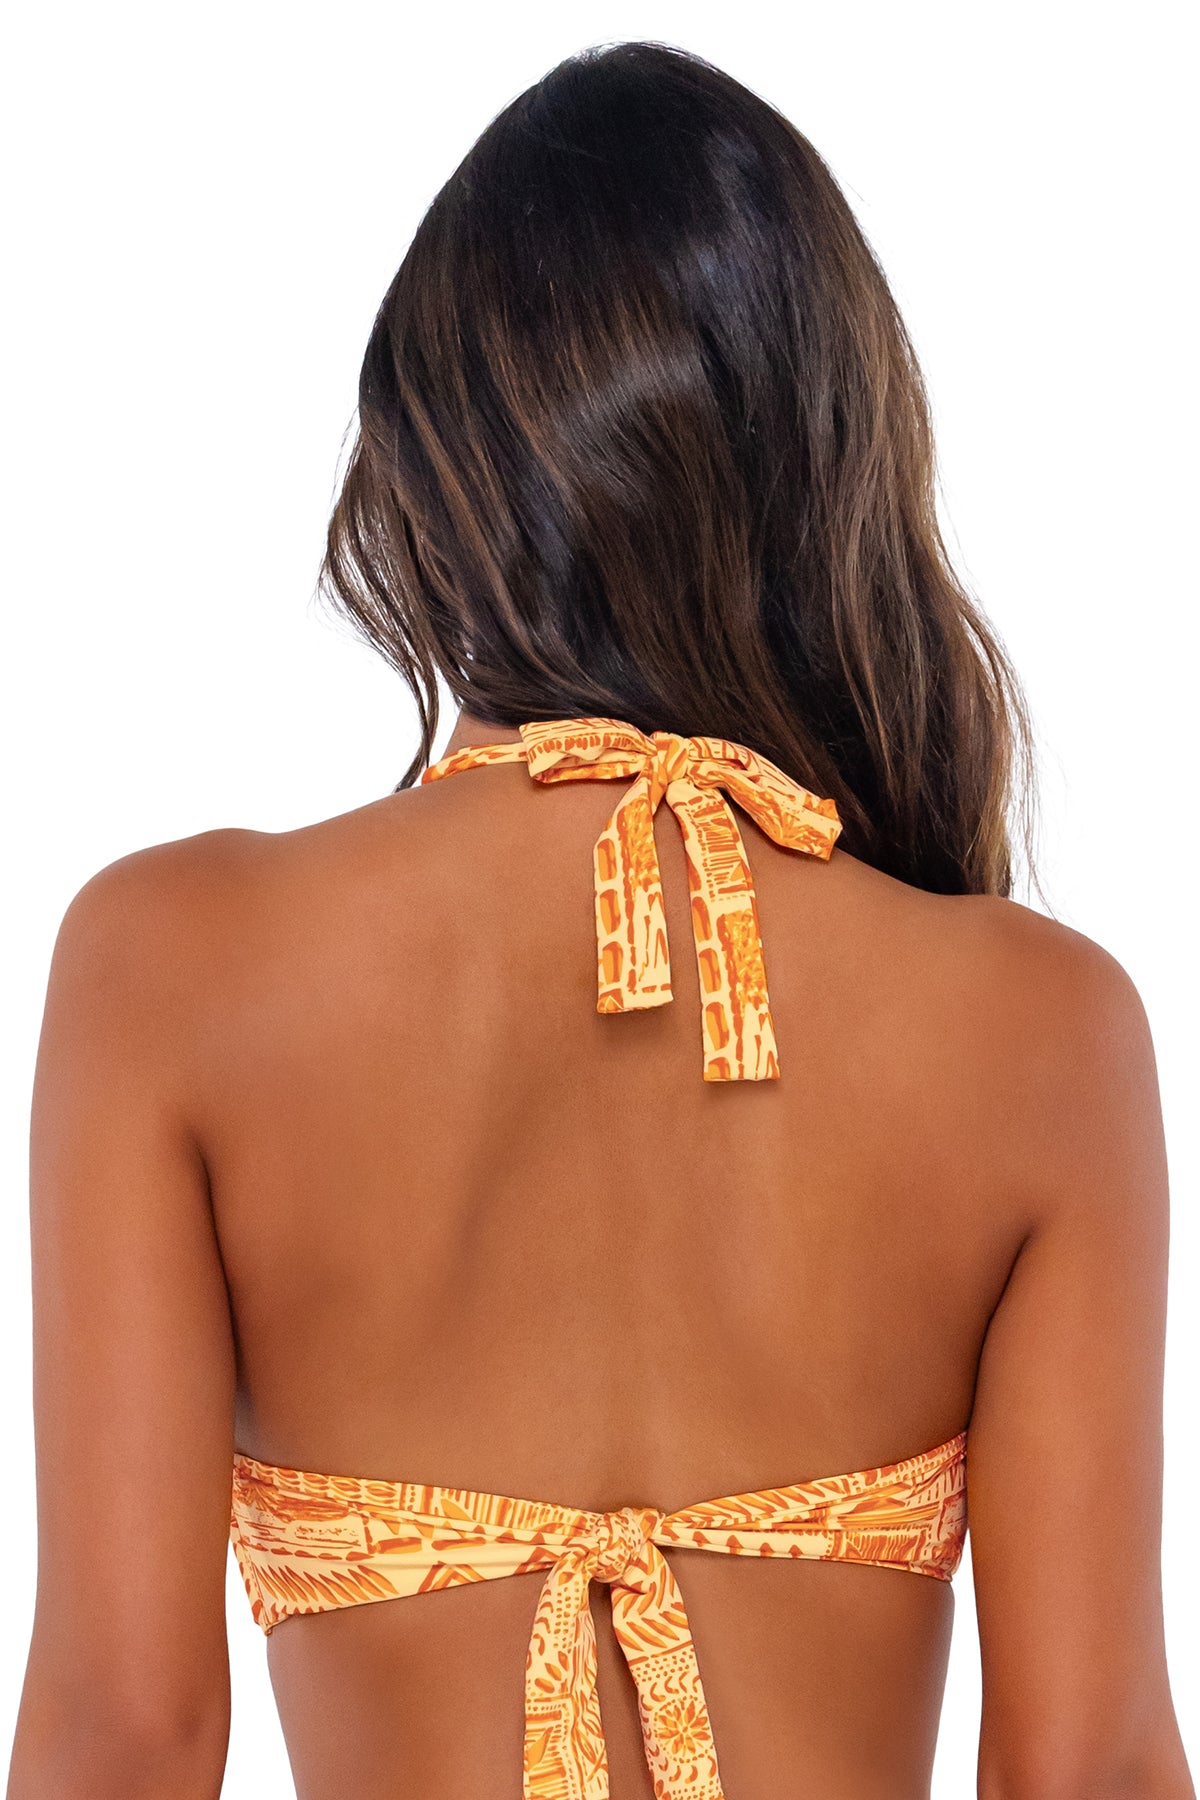 Back pose #1 of Chonzie wearing Swim Systems Playa Hermosa Kendall Top